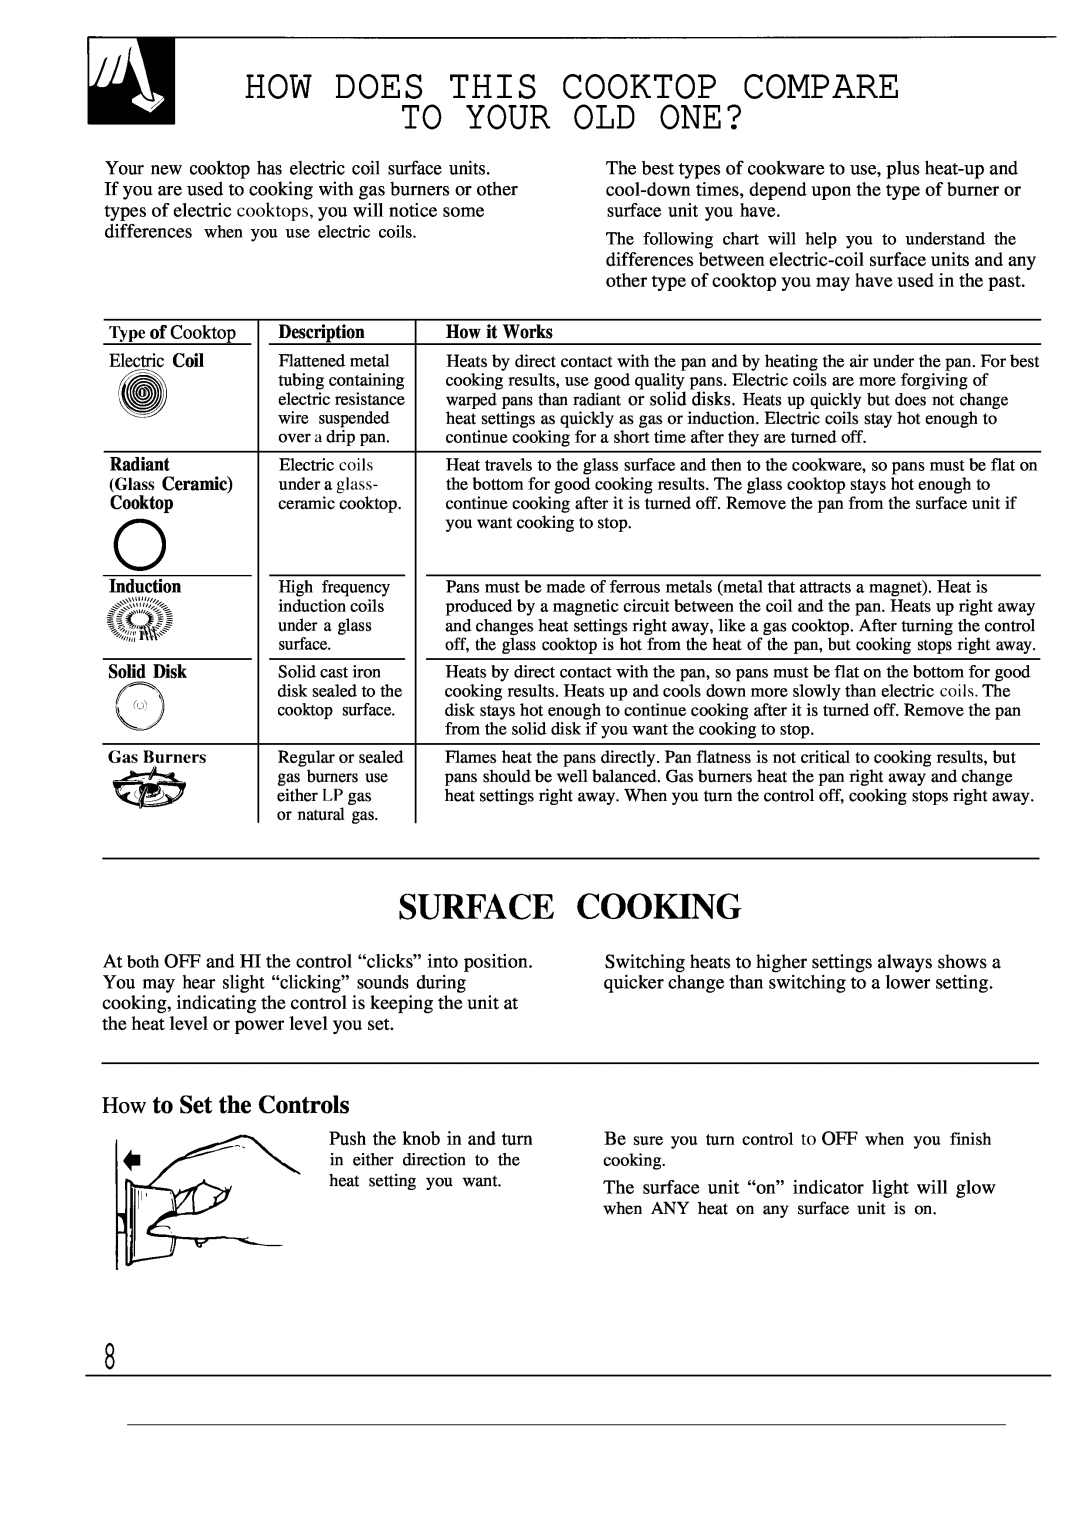 GE JBP55 How Does This Cooktop Compare To Your Old One?, SU~ACE COOmG, How to Set the Controls, l“ ~, ~pe of Cooktop 